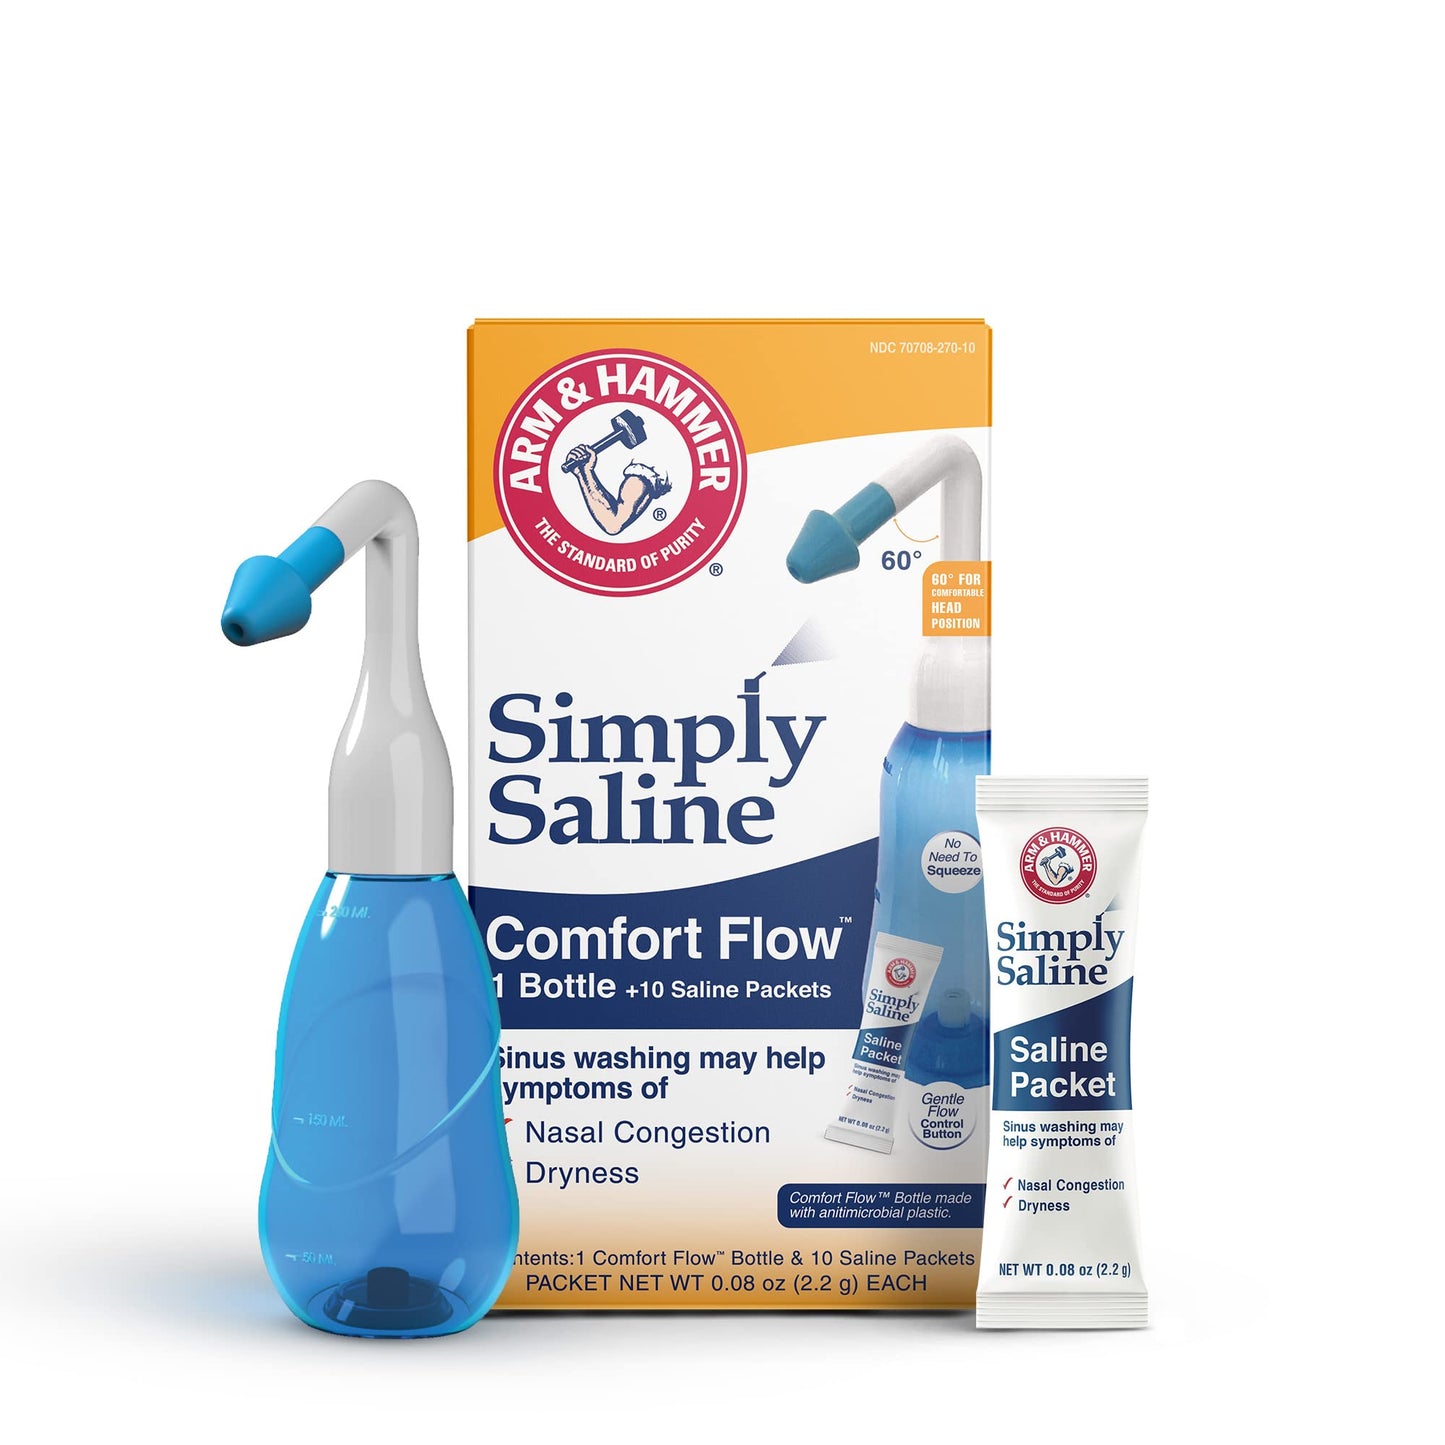 Arm & Hammer Comfort Flow with 10 Salt Packets, Nasal Rinse Kit for Sinus Wash, Helps Relieve Nasal Congestion & Irritation, Dryness, All-Natural, BPA-Free, Adults & Kids, Blue (240mL)